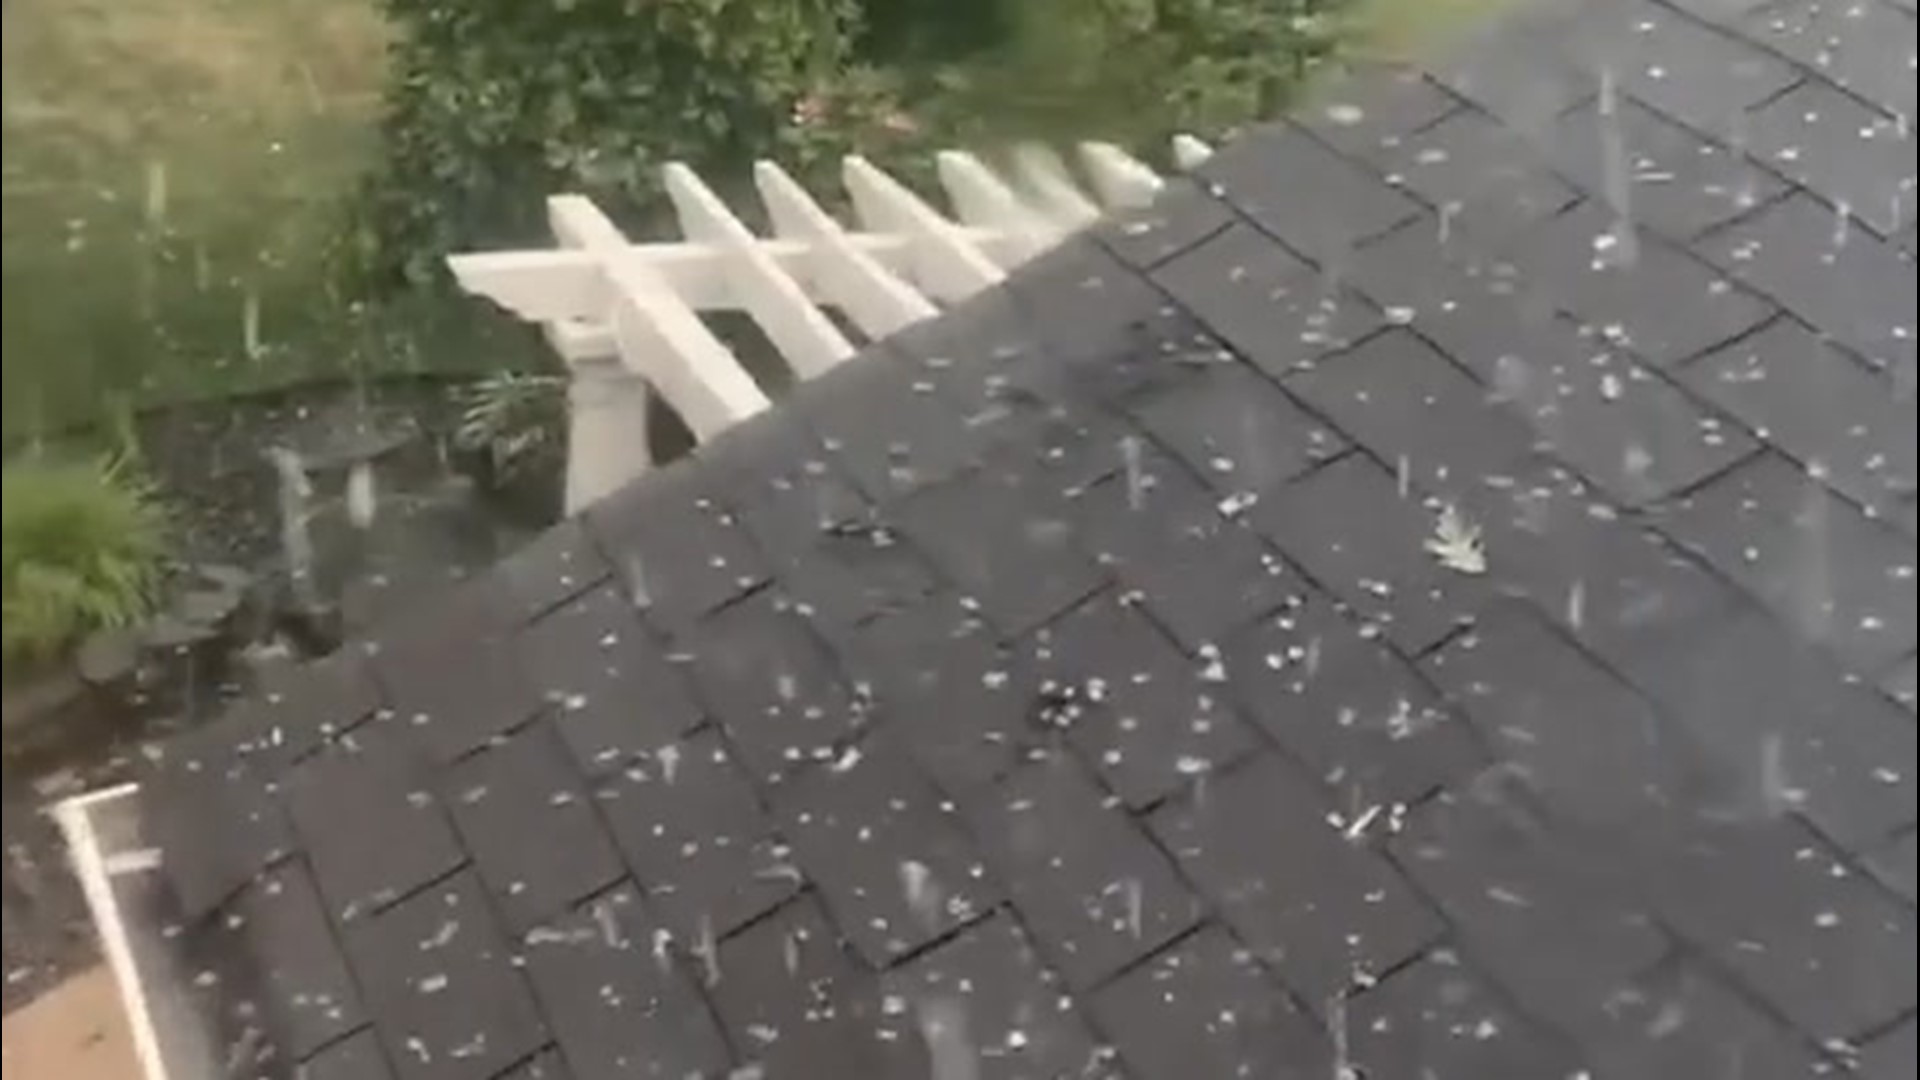 Strong winds accompanied by hail swept through Jefferson County, West Virginia, on July 7.